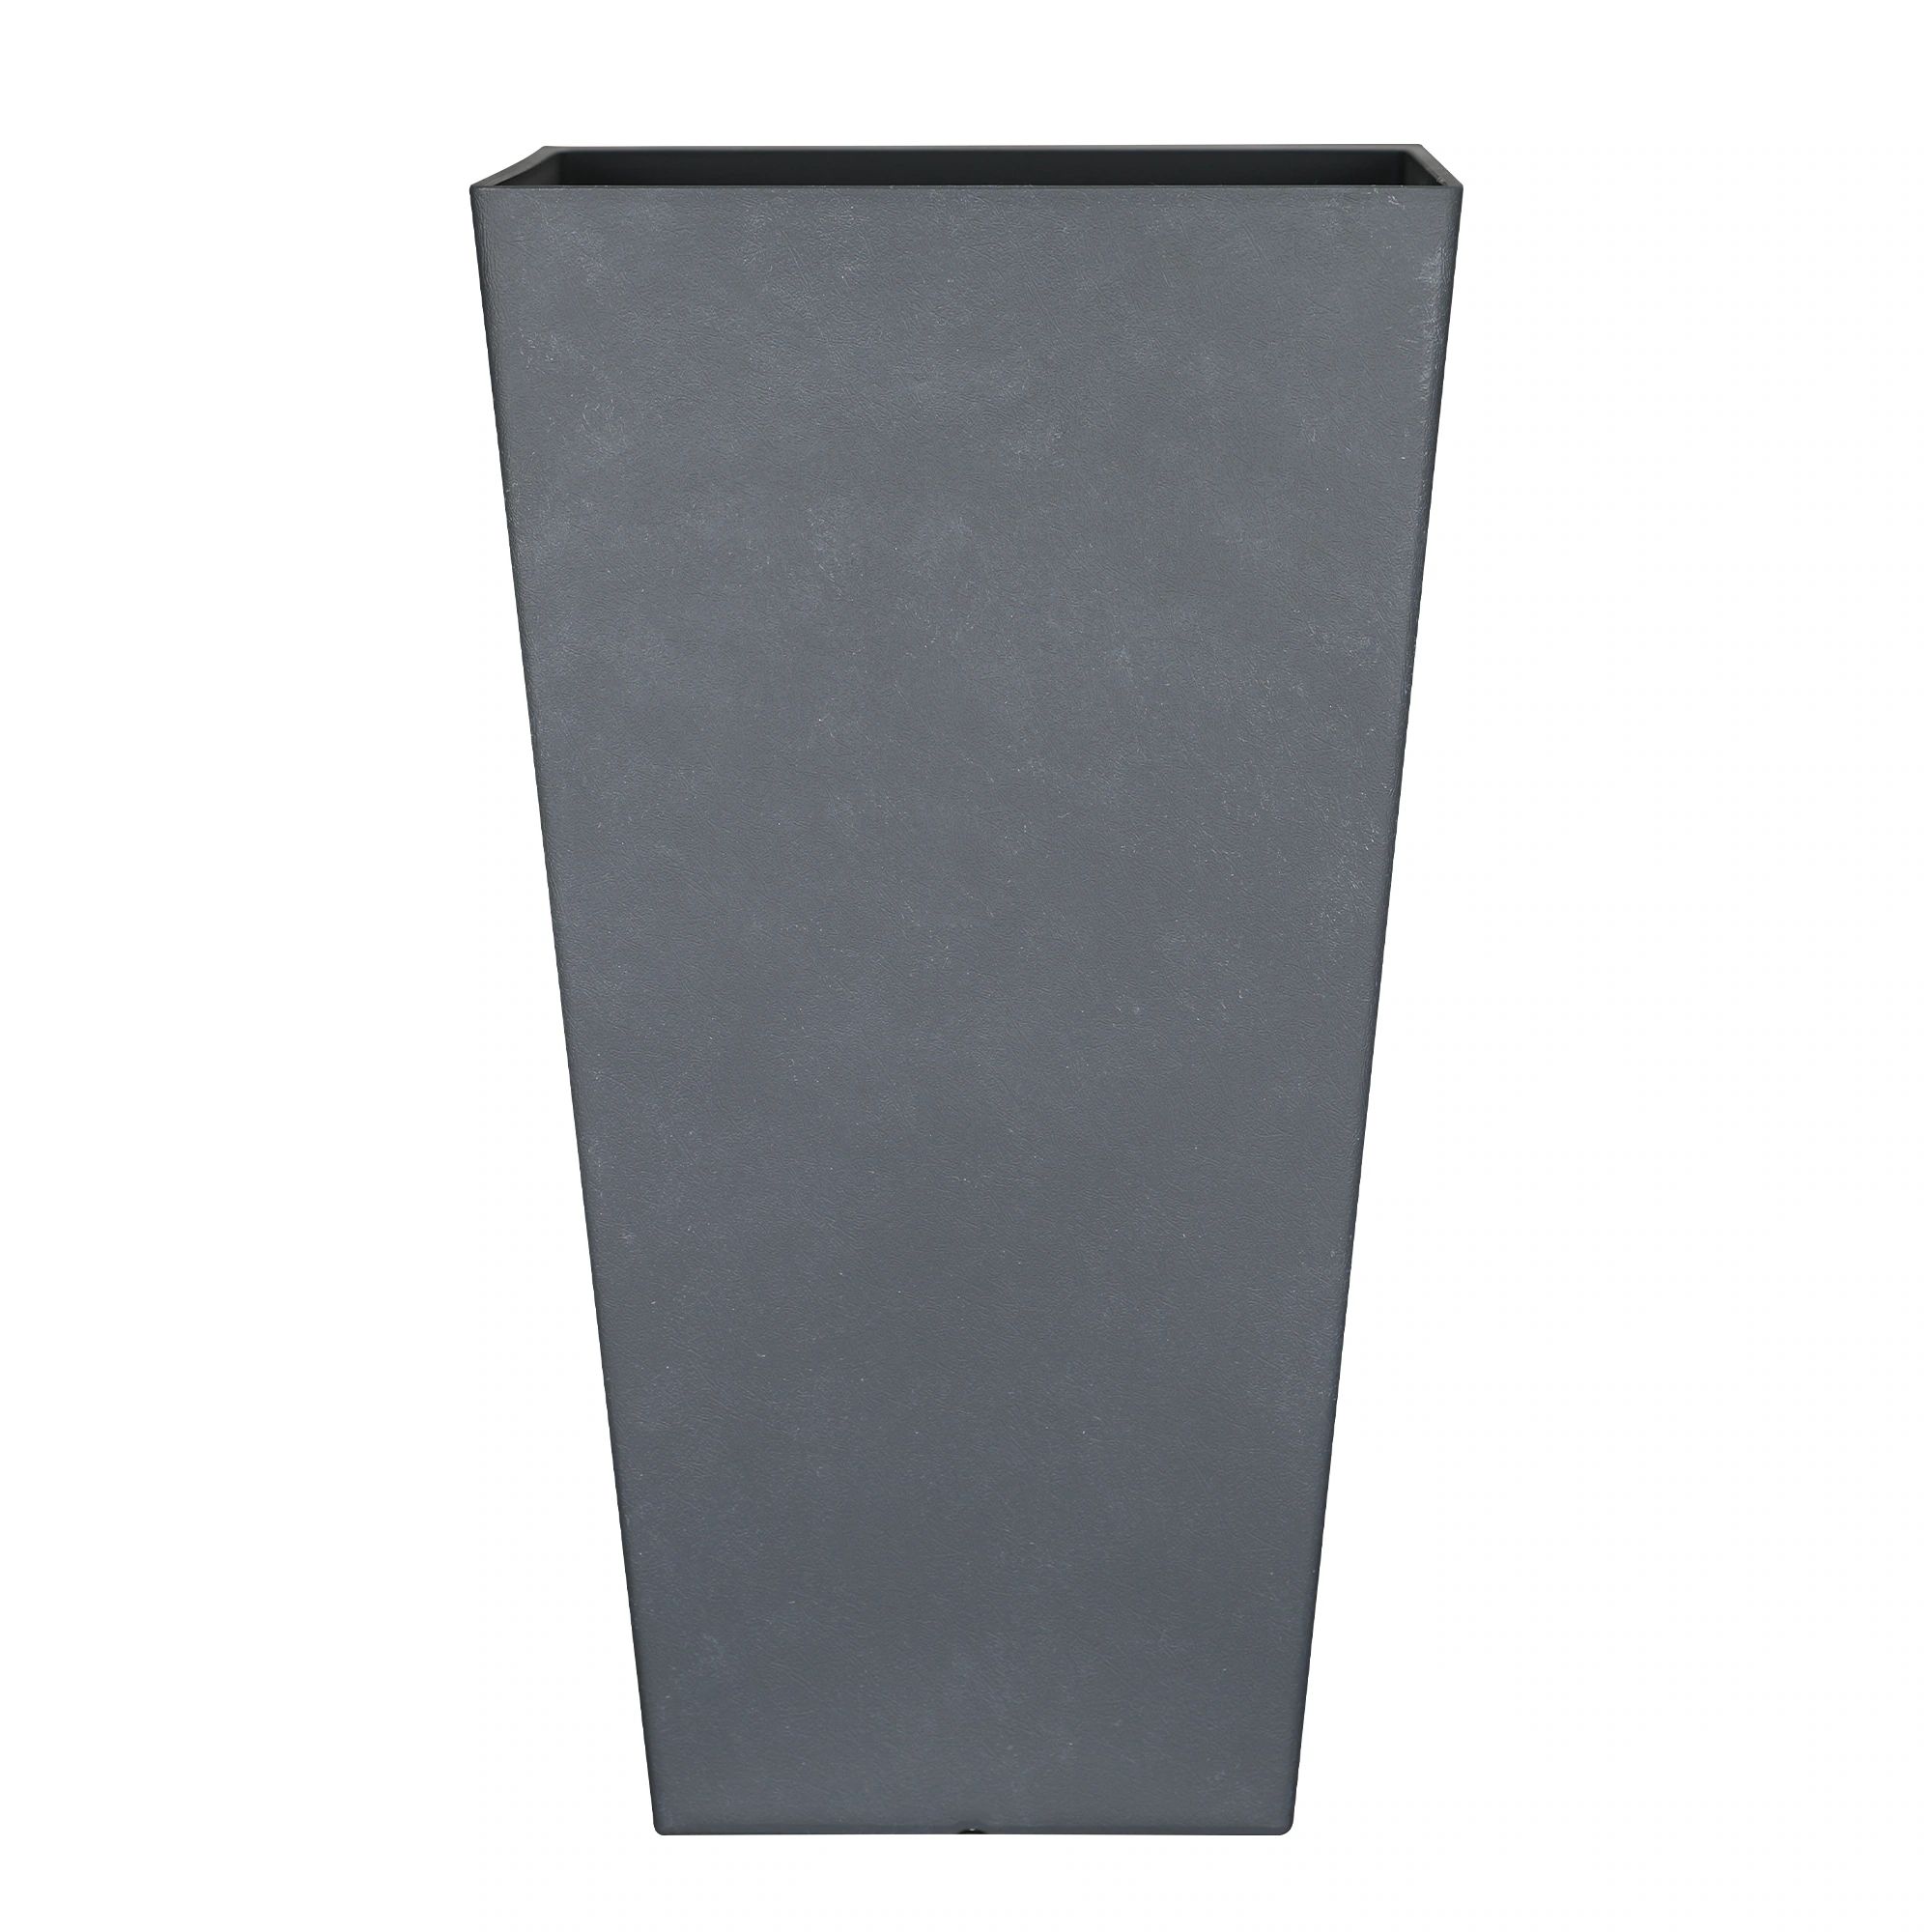 allen + roth 11.3-in x 20.87-in Gray Resin Planter with Drainage Holes | Lowe's